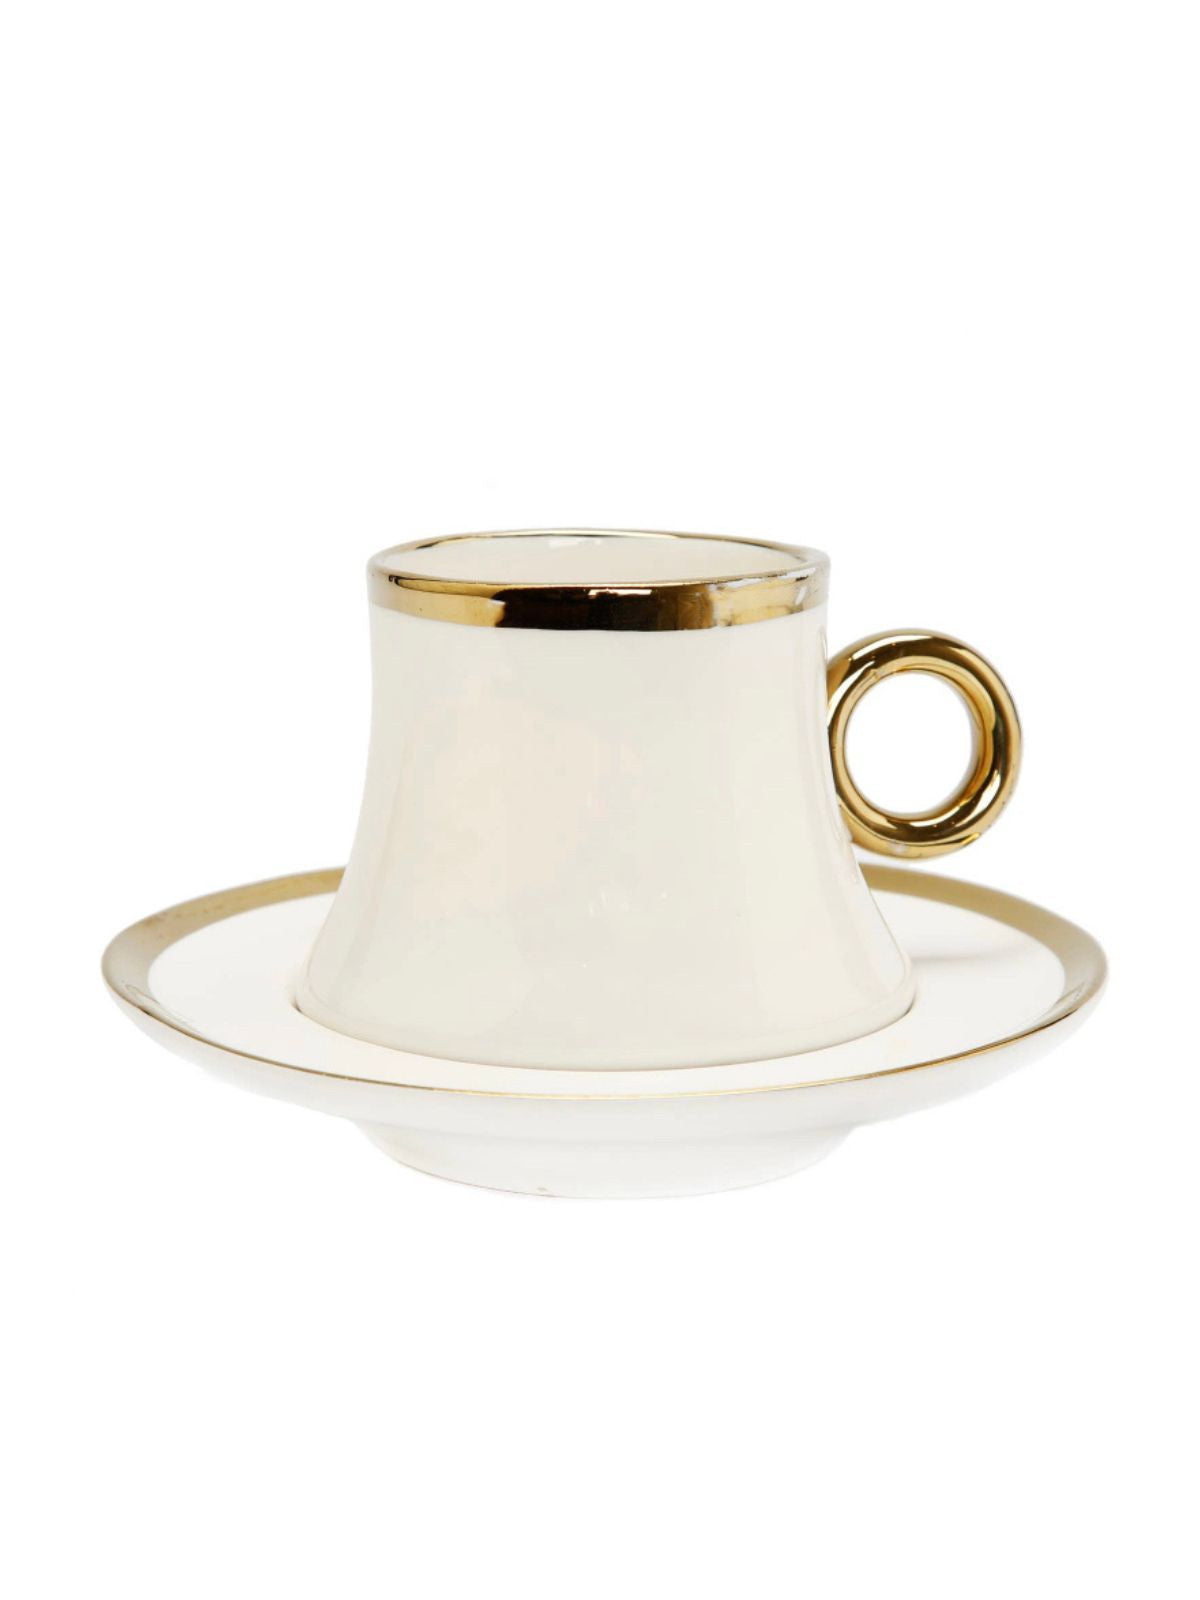 This is a gorgeous white and gold coffee mug with beautiful gold handle. This mug and saucer set is sure to become a favorite on your coffee station.  